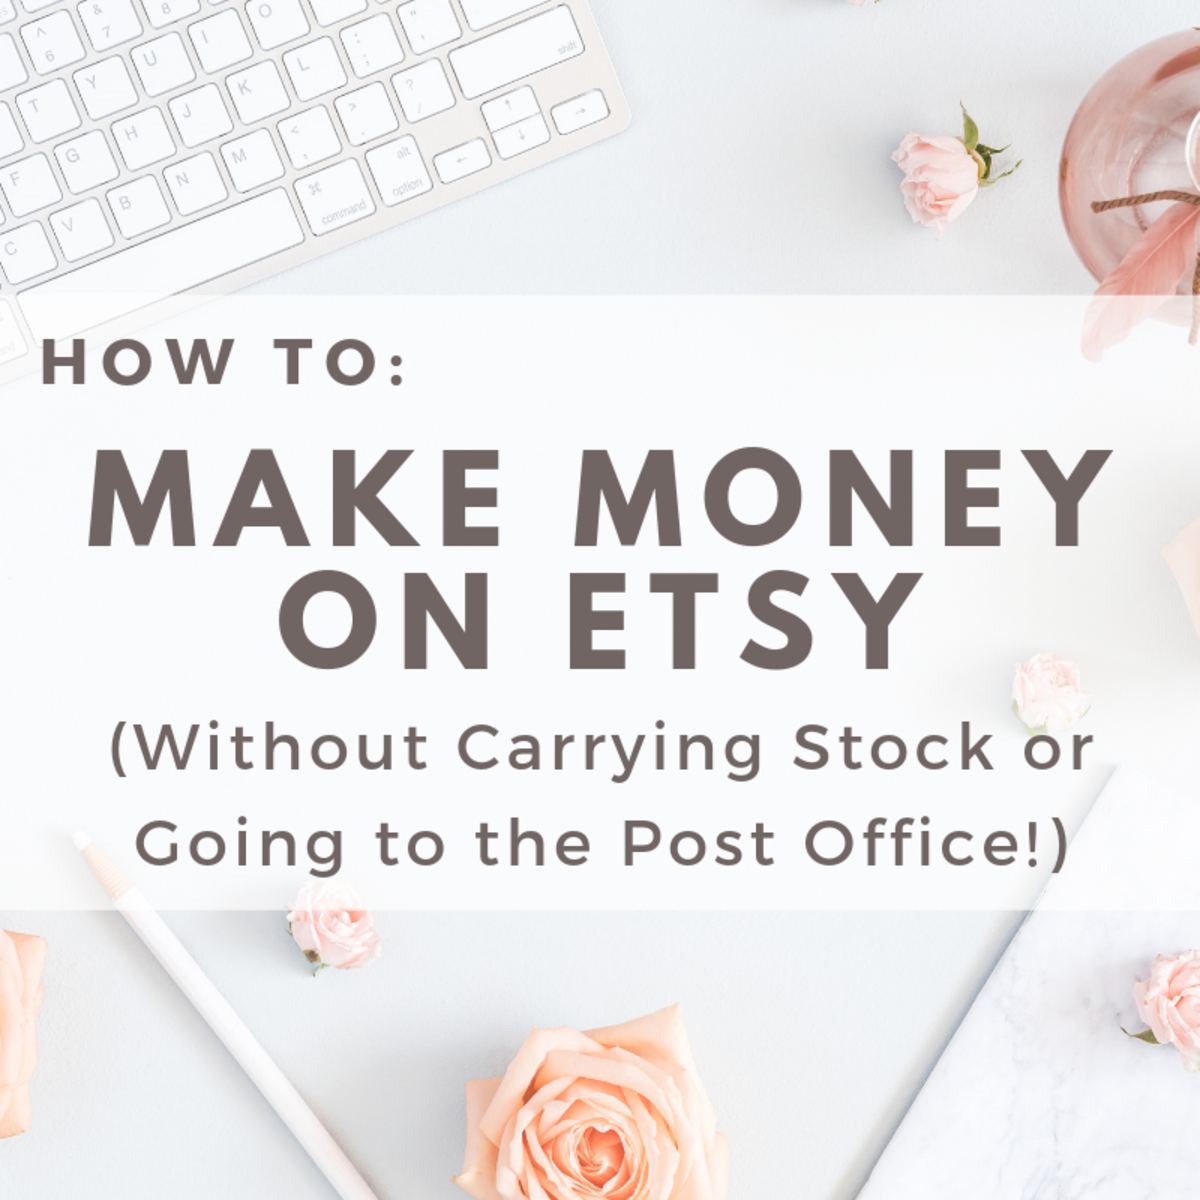 Did you know that you can still make money on Etsy even if you're not into crafting? Here's how you can create an amazing side hustle without leaving the couch!